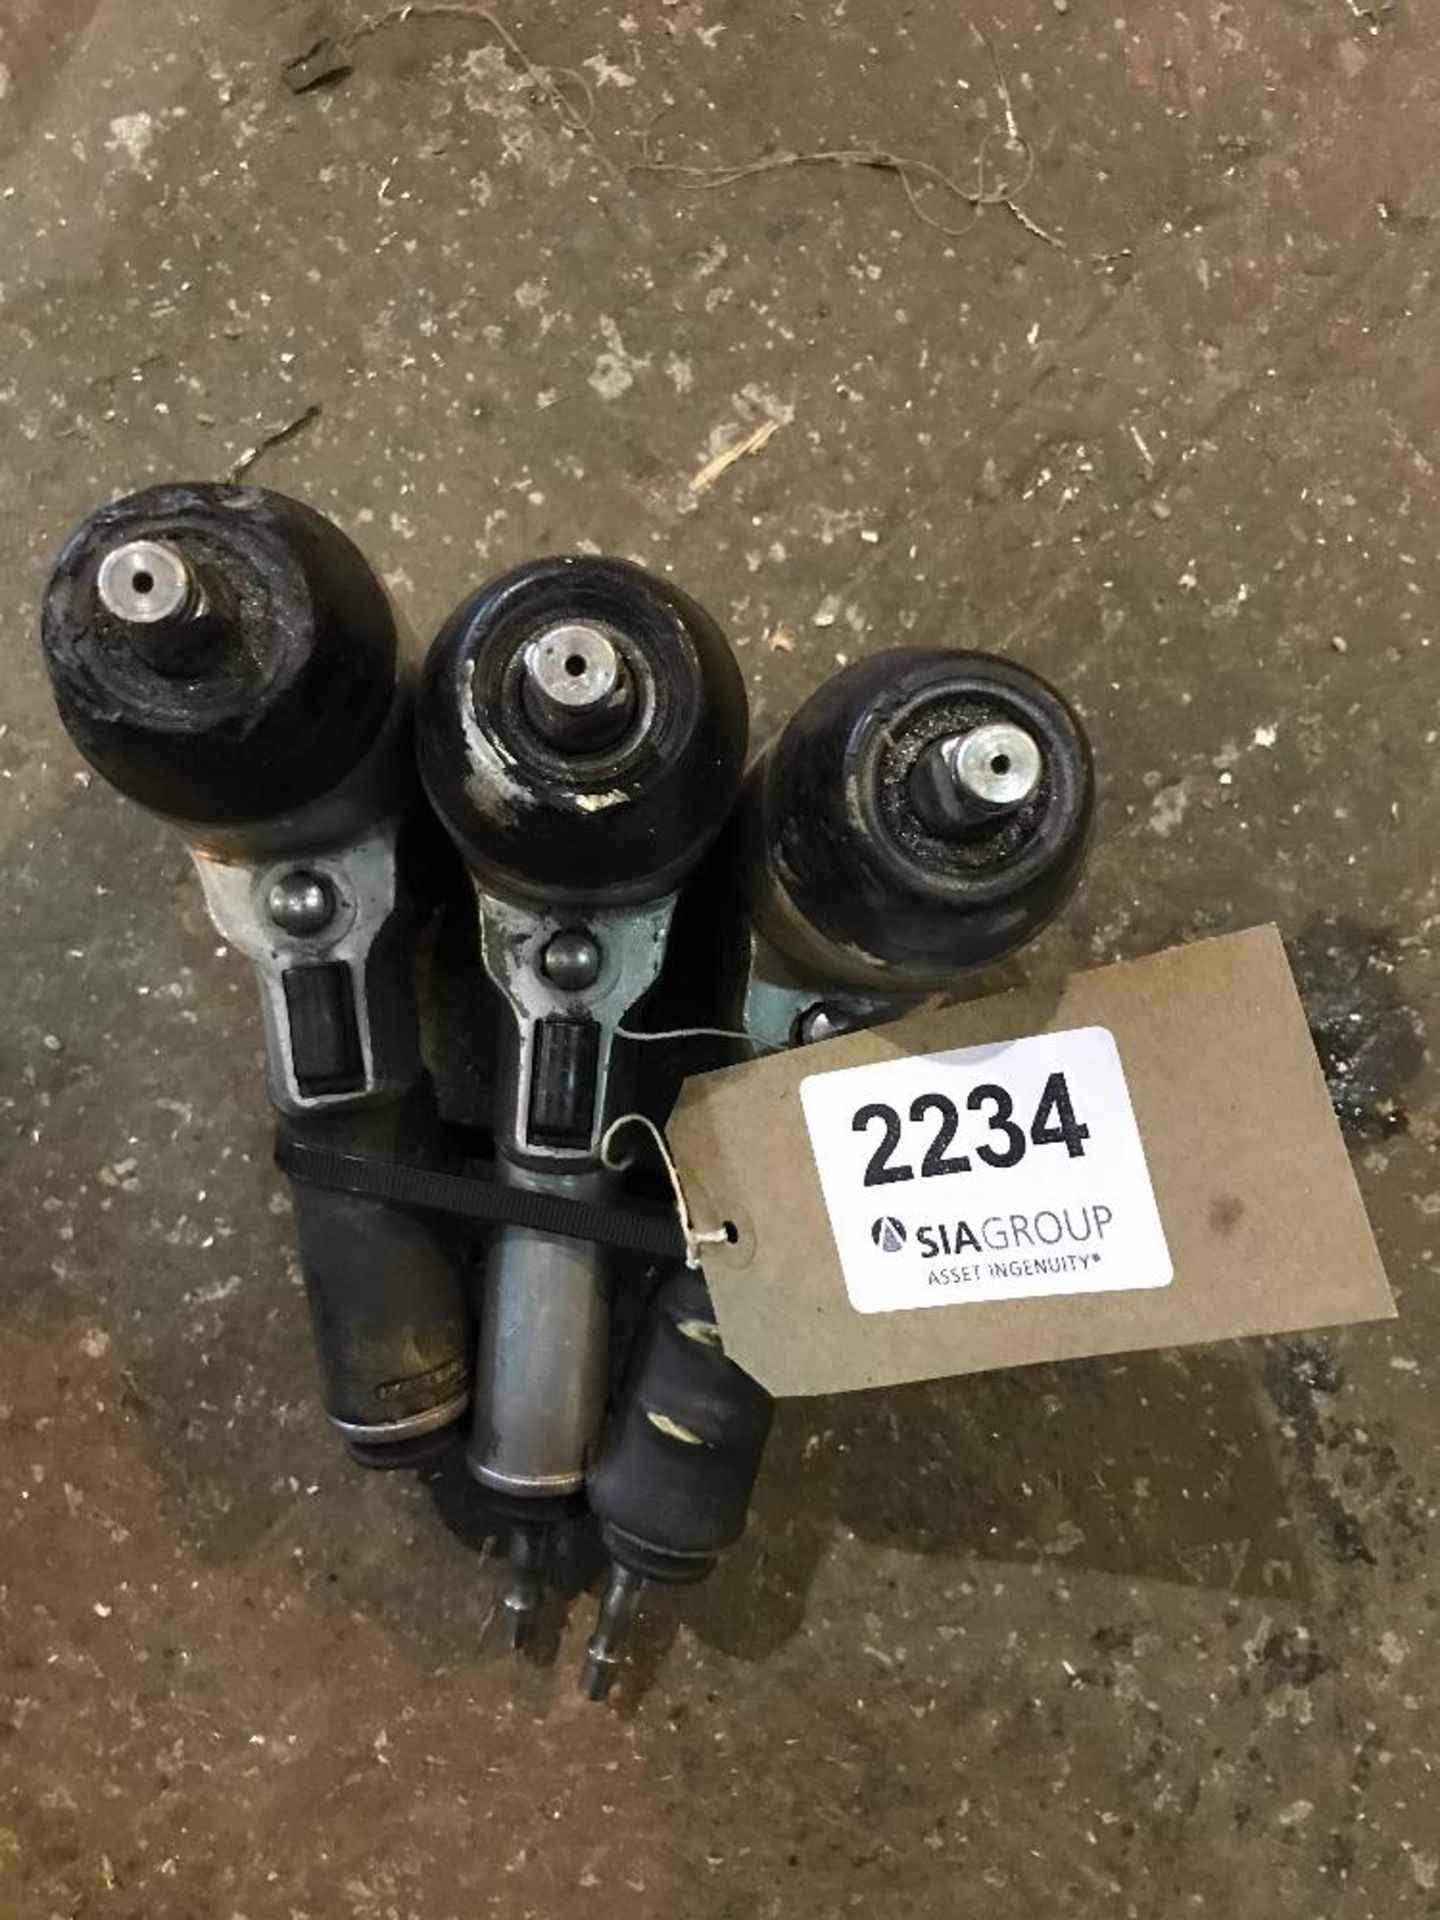 (3) Pneumatic Impact Wrenches - Unbranded